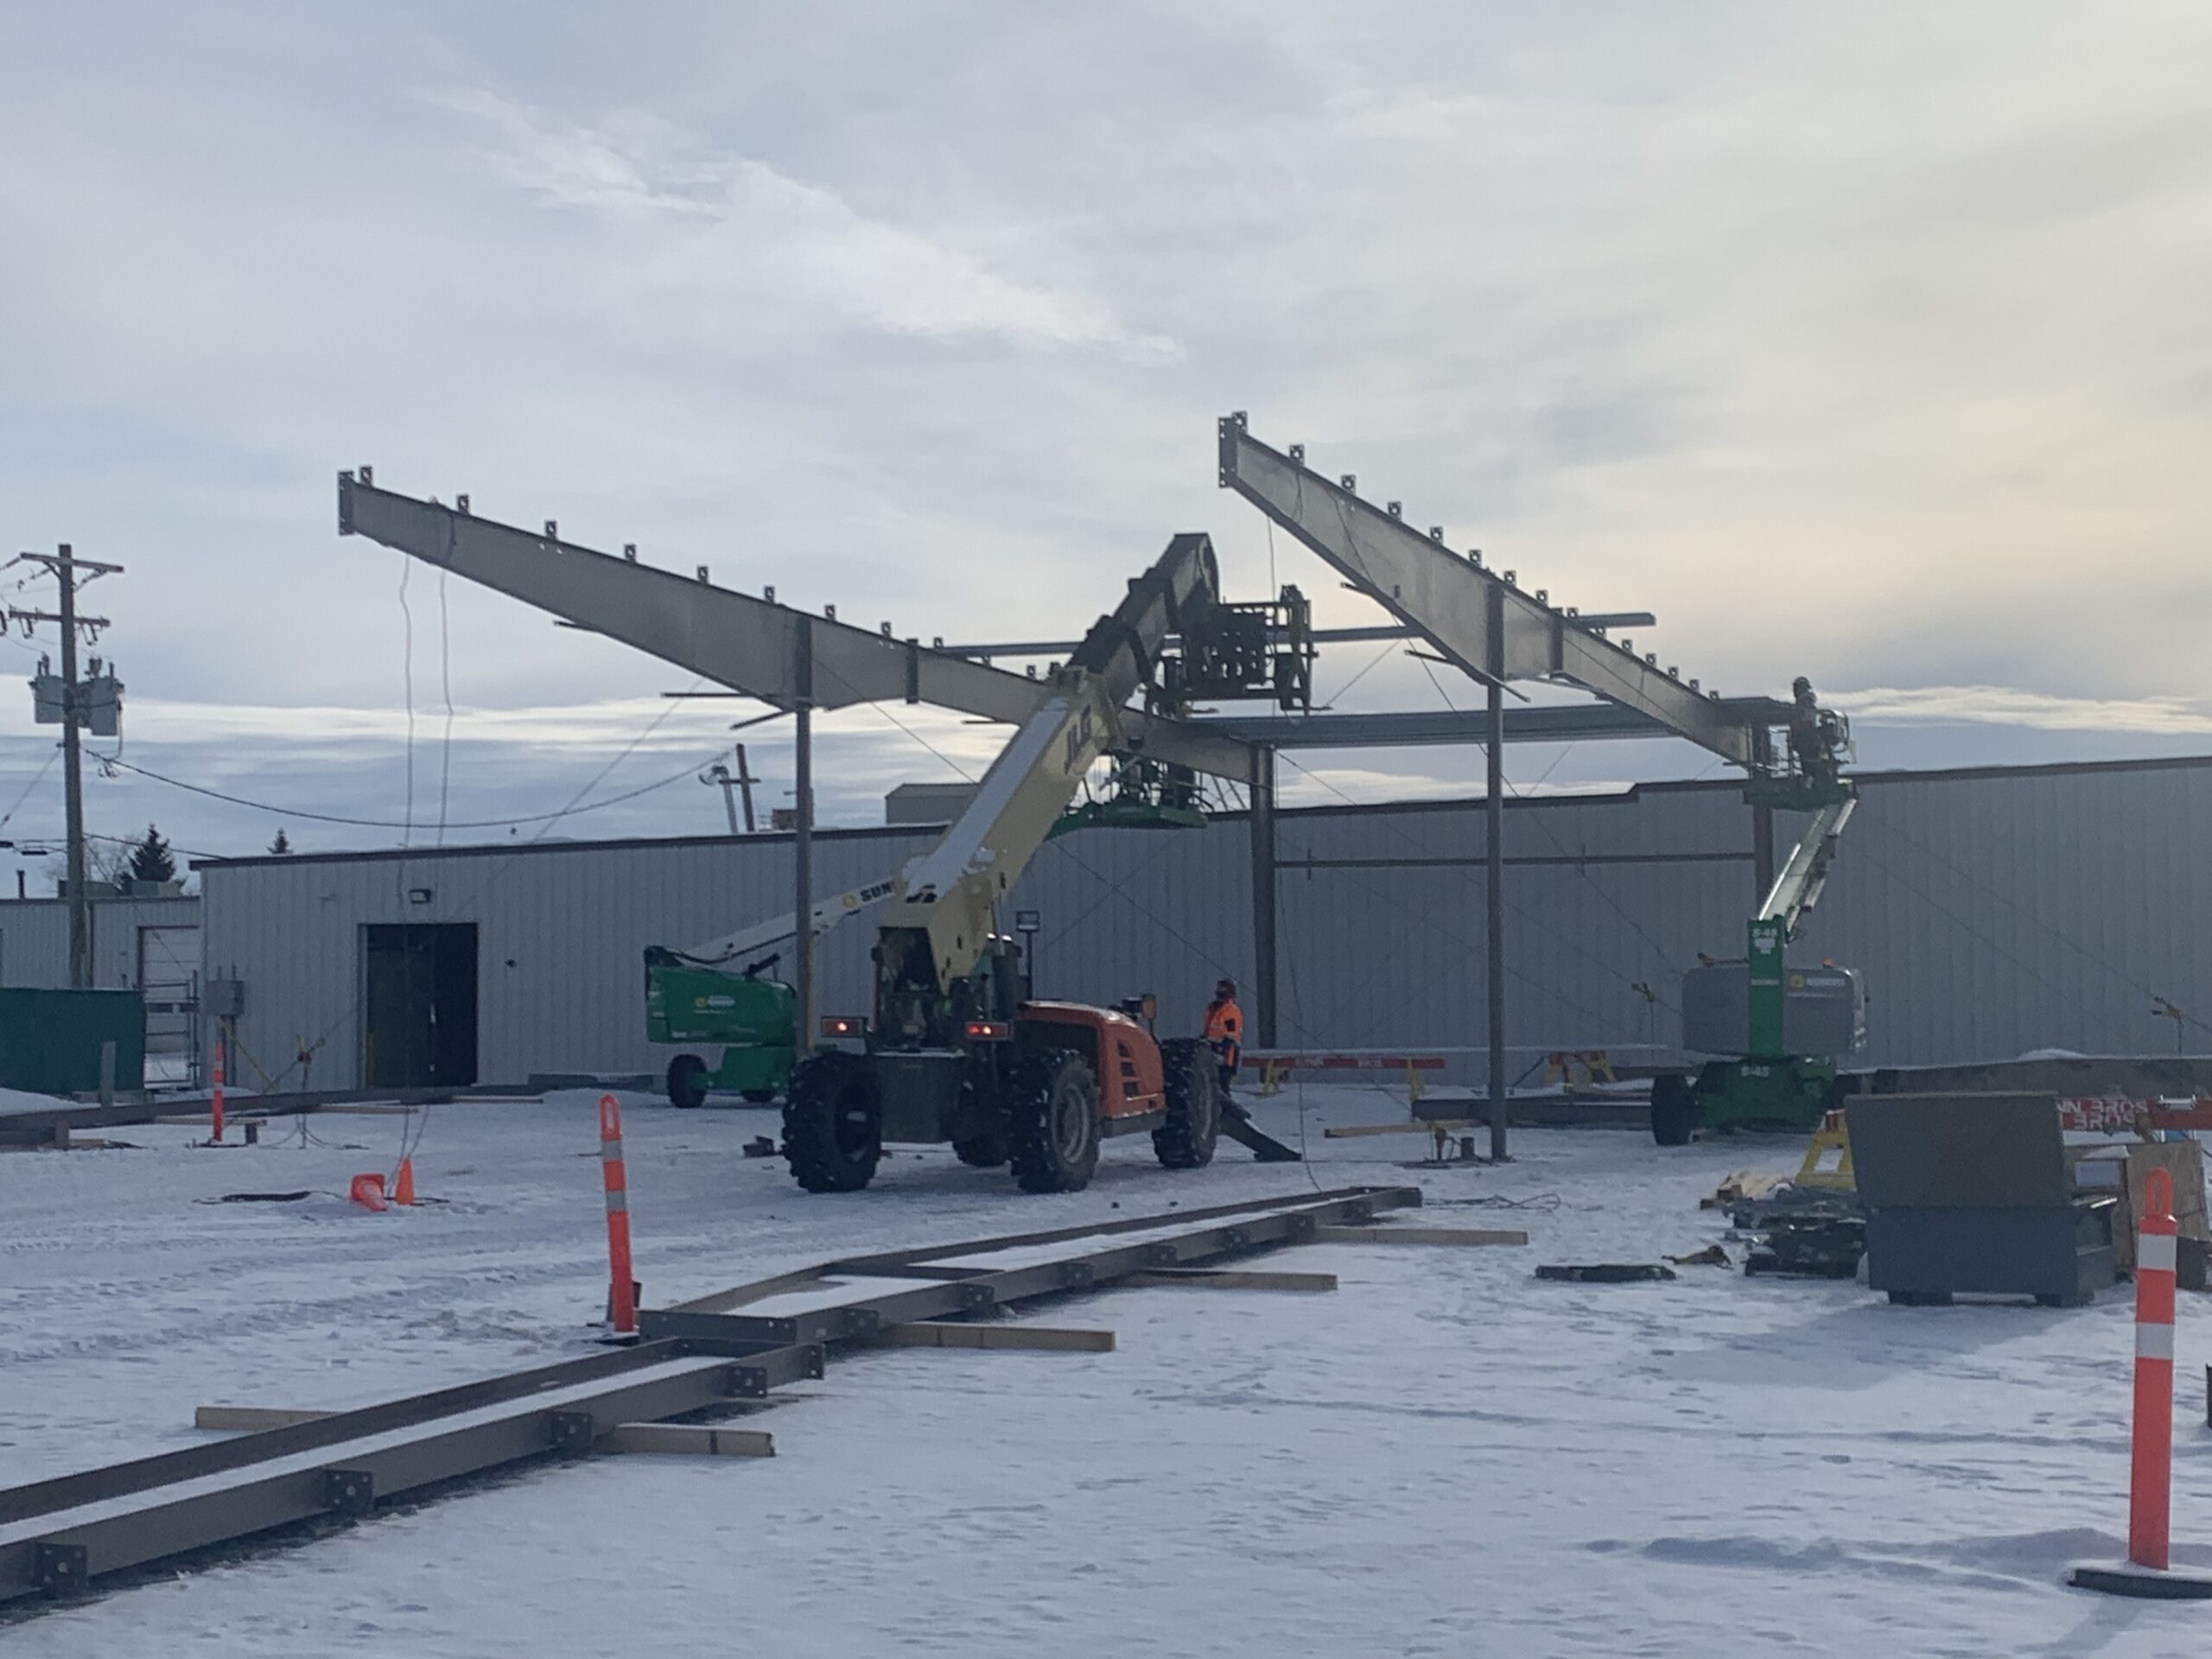 An orange telehandler lifts equipment onto a white fabricated steel structure.